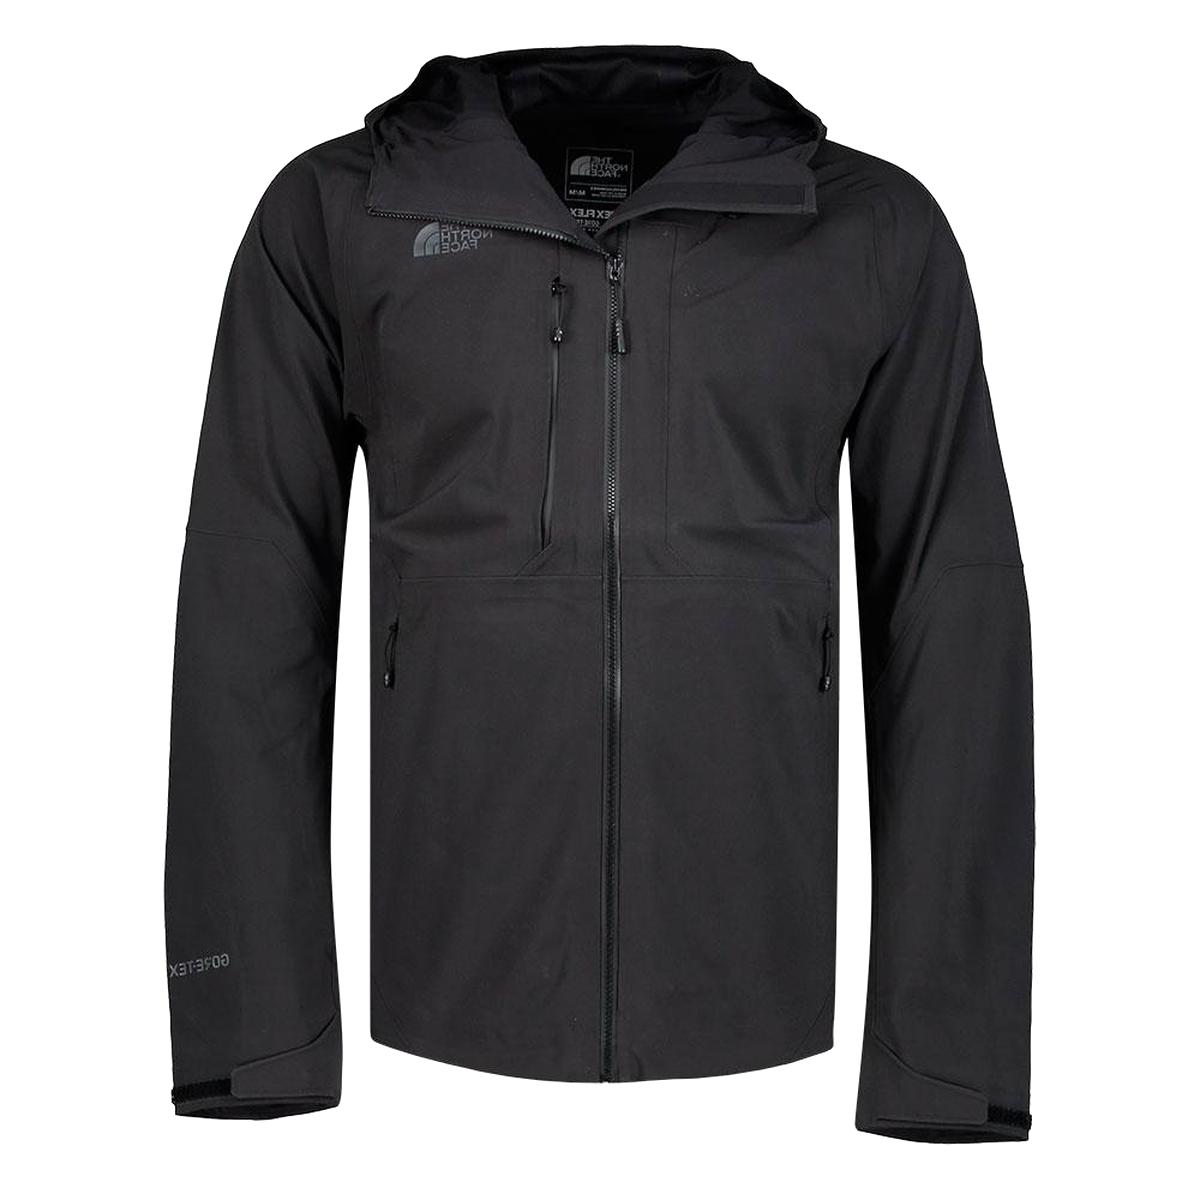 North Face Gore Tex Jacket for sale in UK | 69 used North Face Gore Tex ...